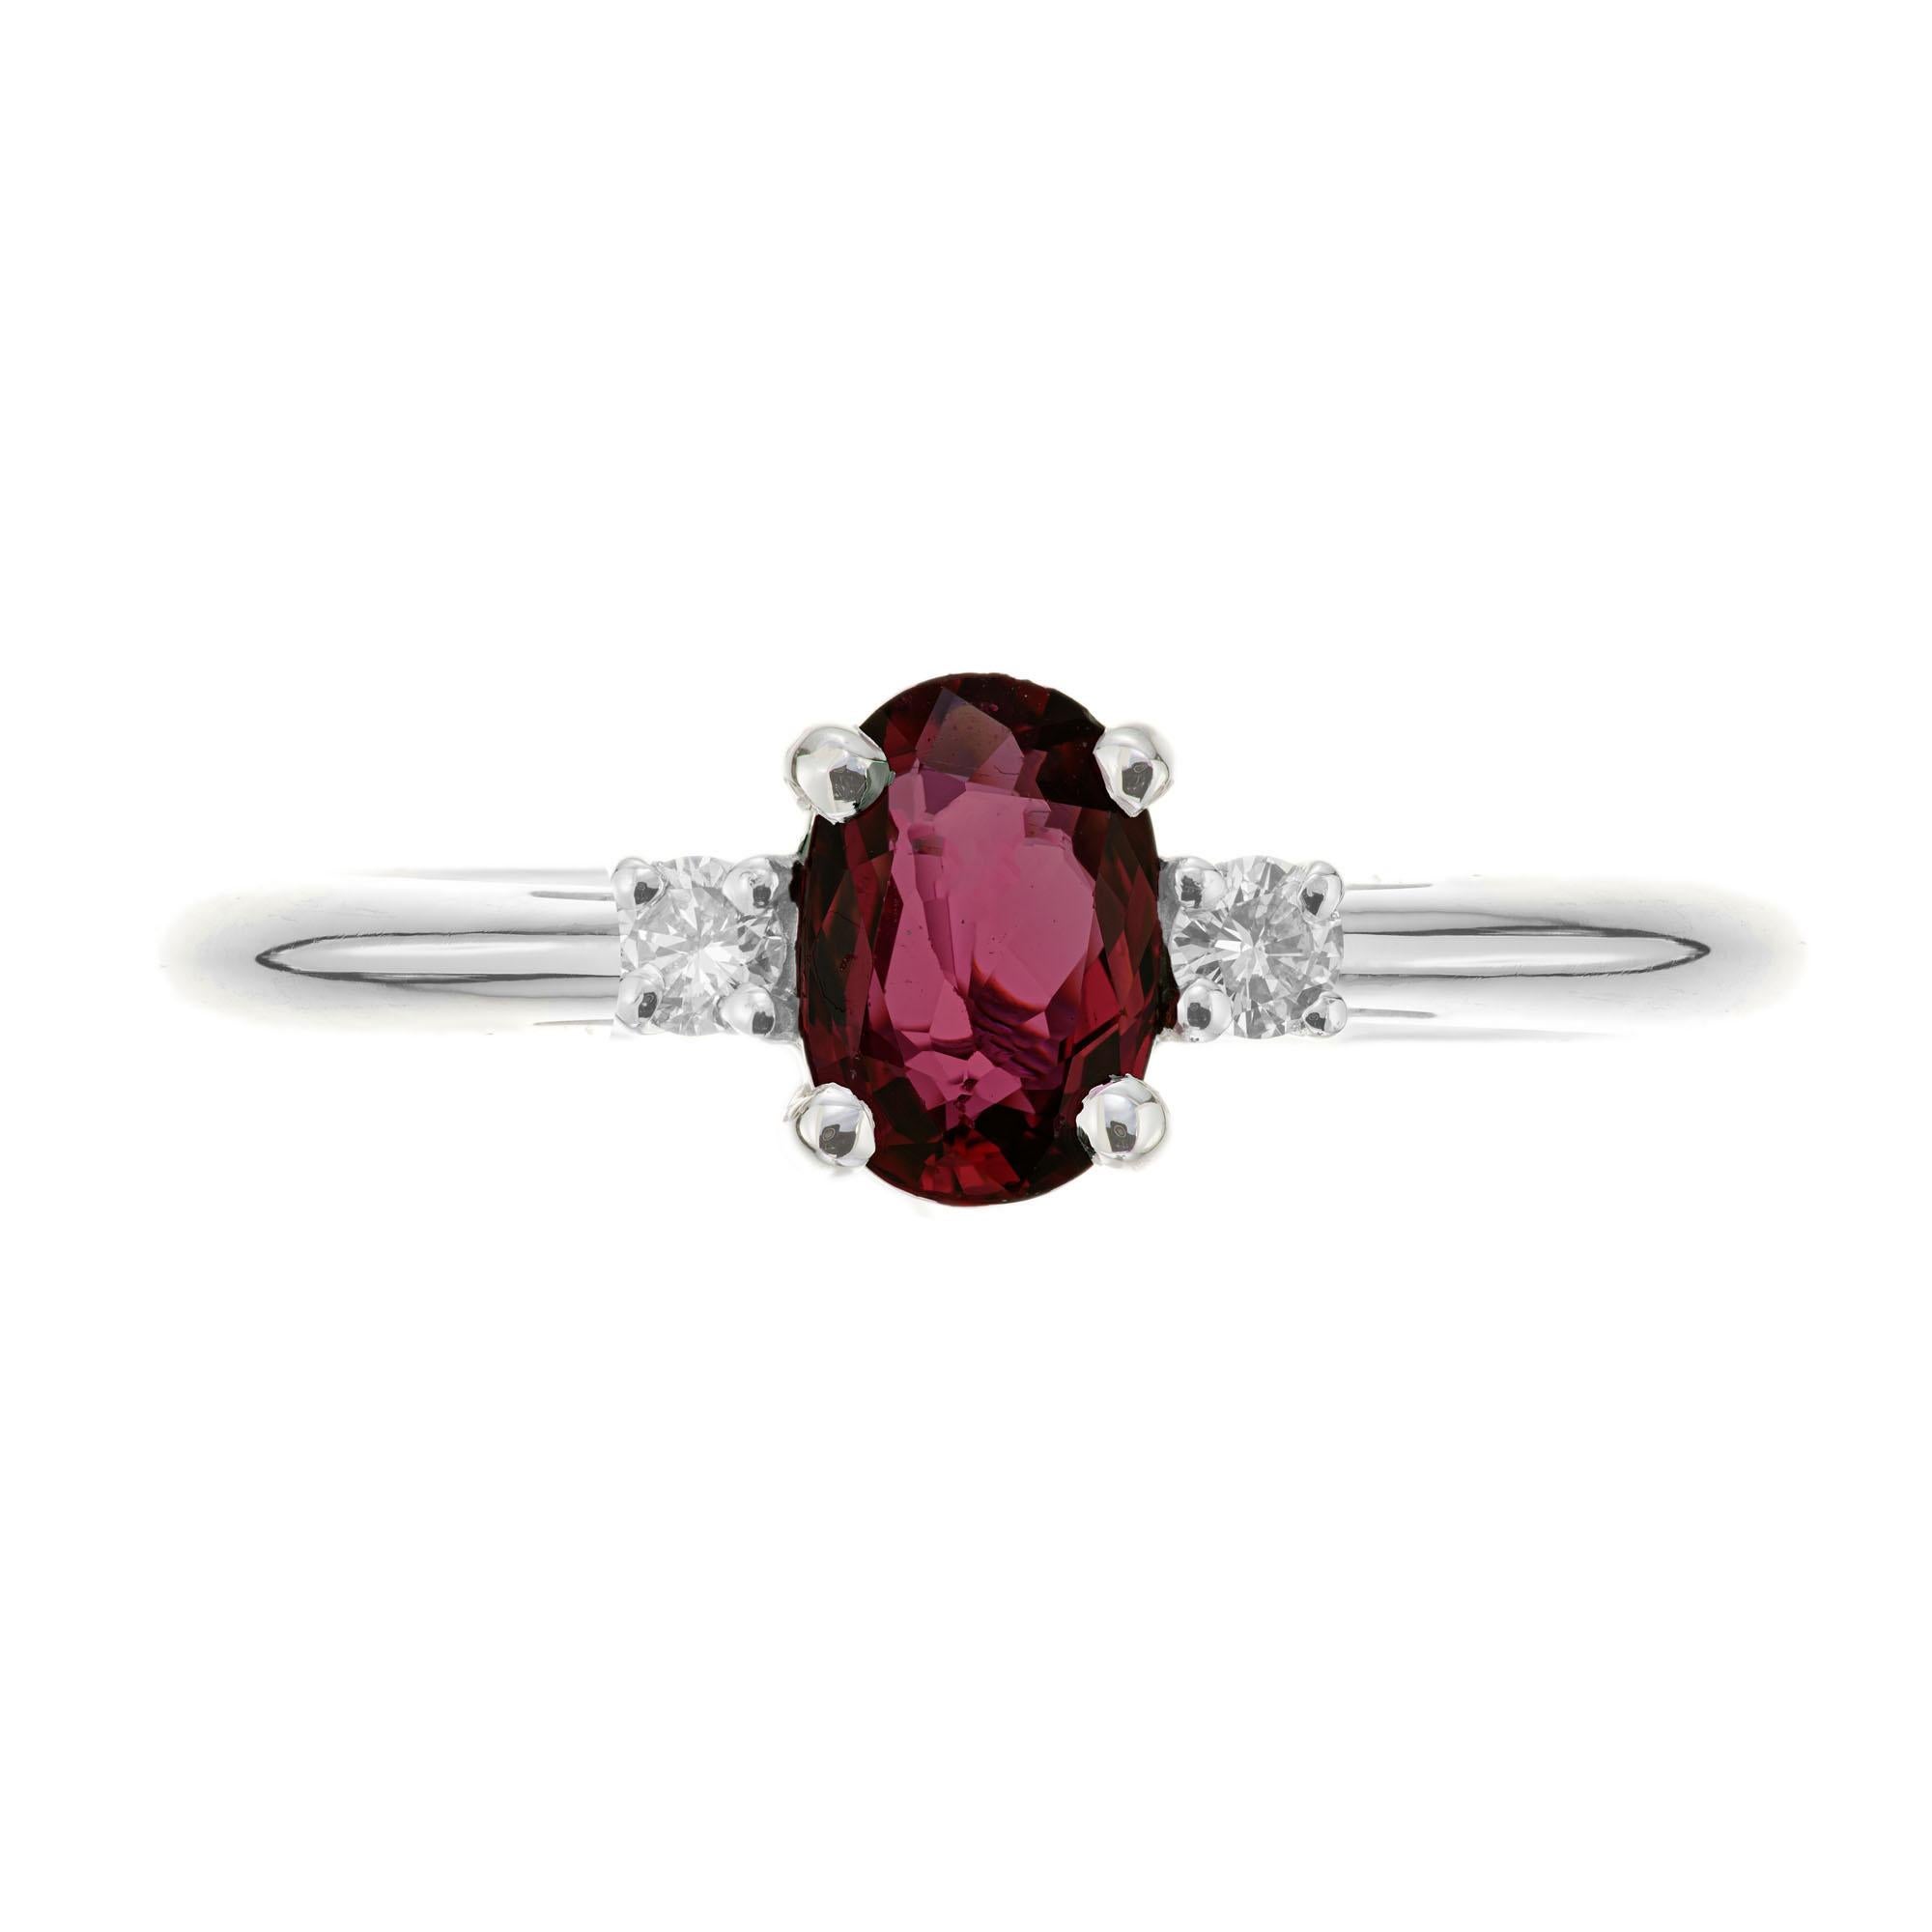 Ruby and diamond engagement ring. Oval ruby center stone with 2 round brilliant cut side diamonds in a 14k white gold three-stone setting. Designed and crafted in the Peter Suchy workshop.

1 oval red ruby, SI approx. .58cts
2 round brilliant cut